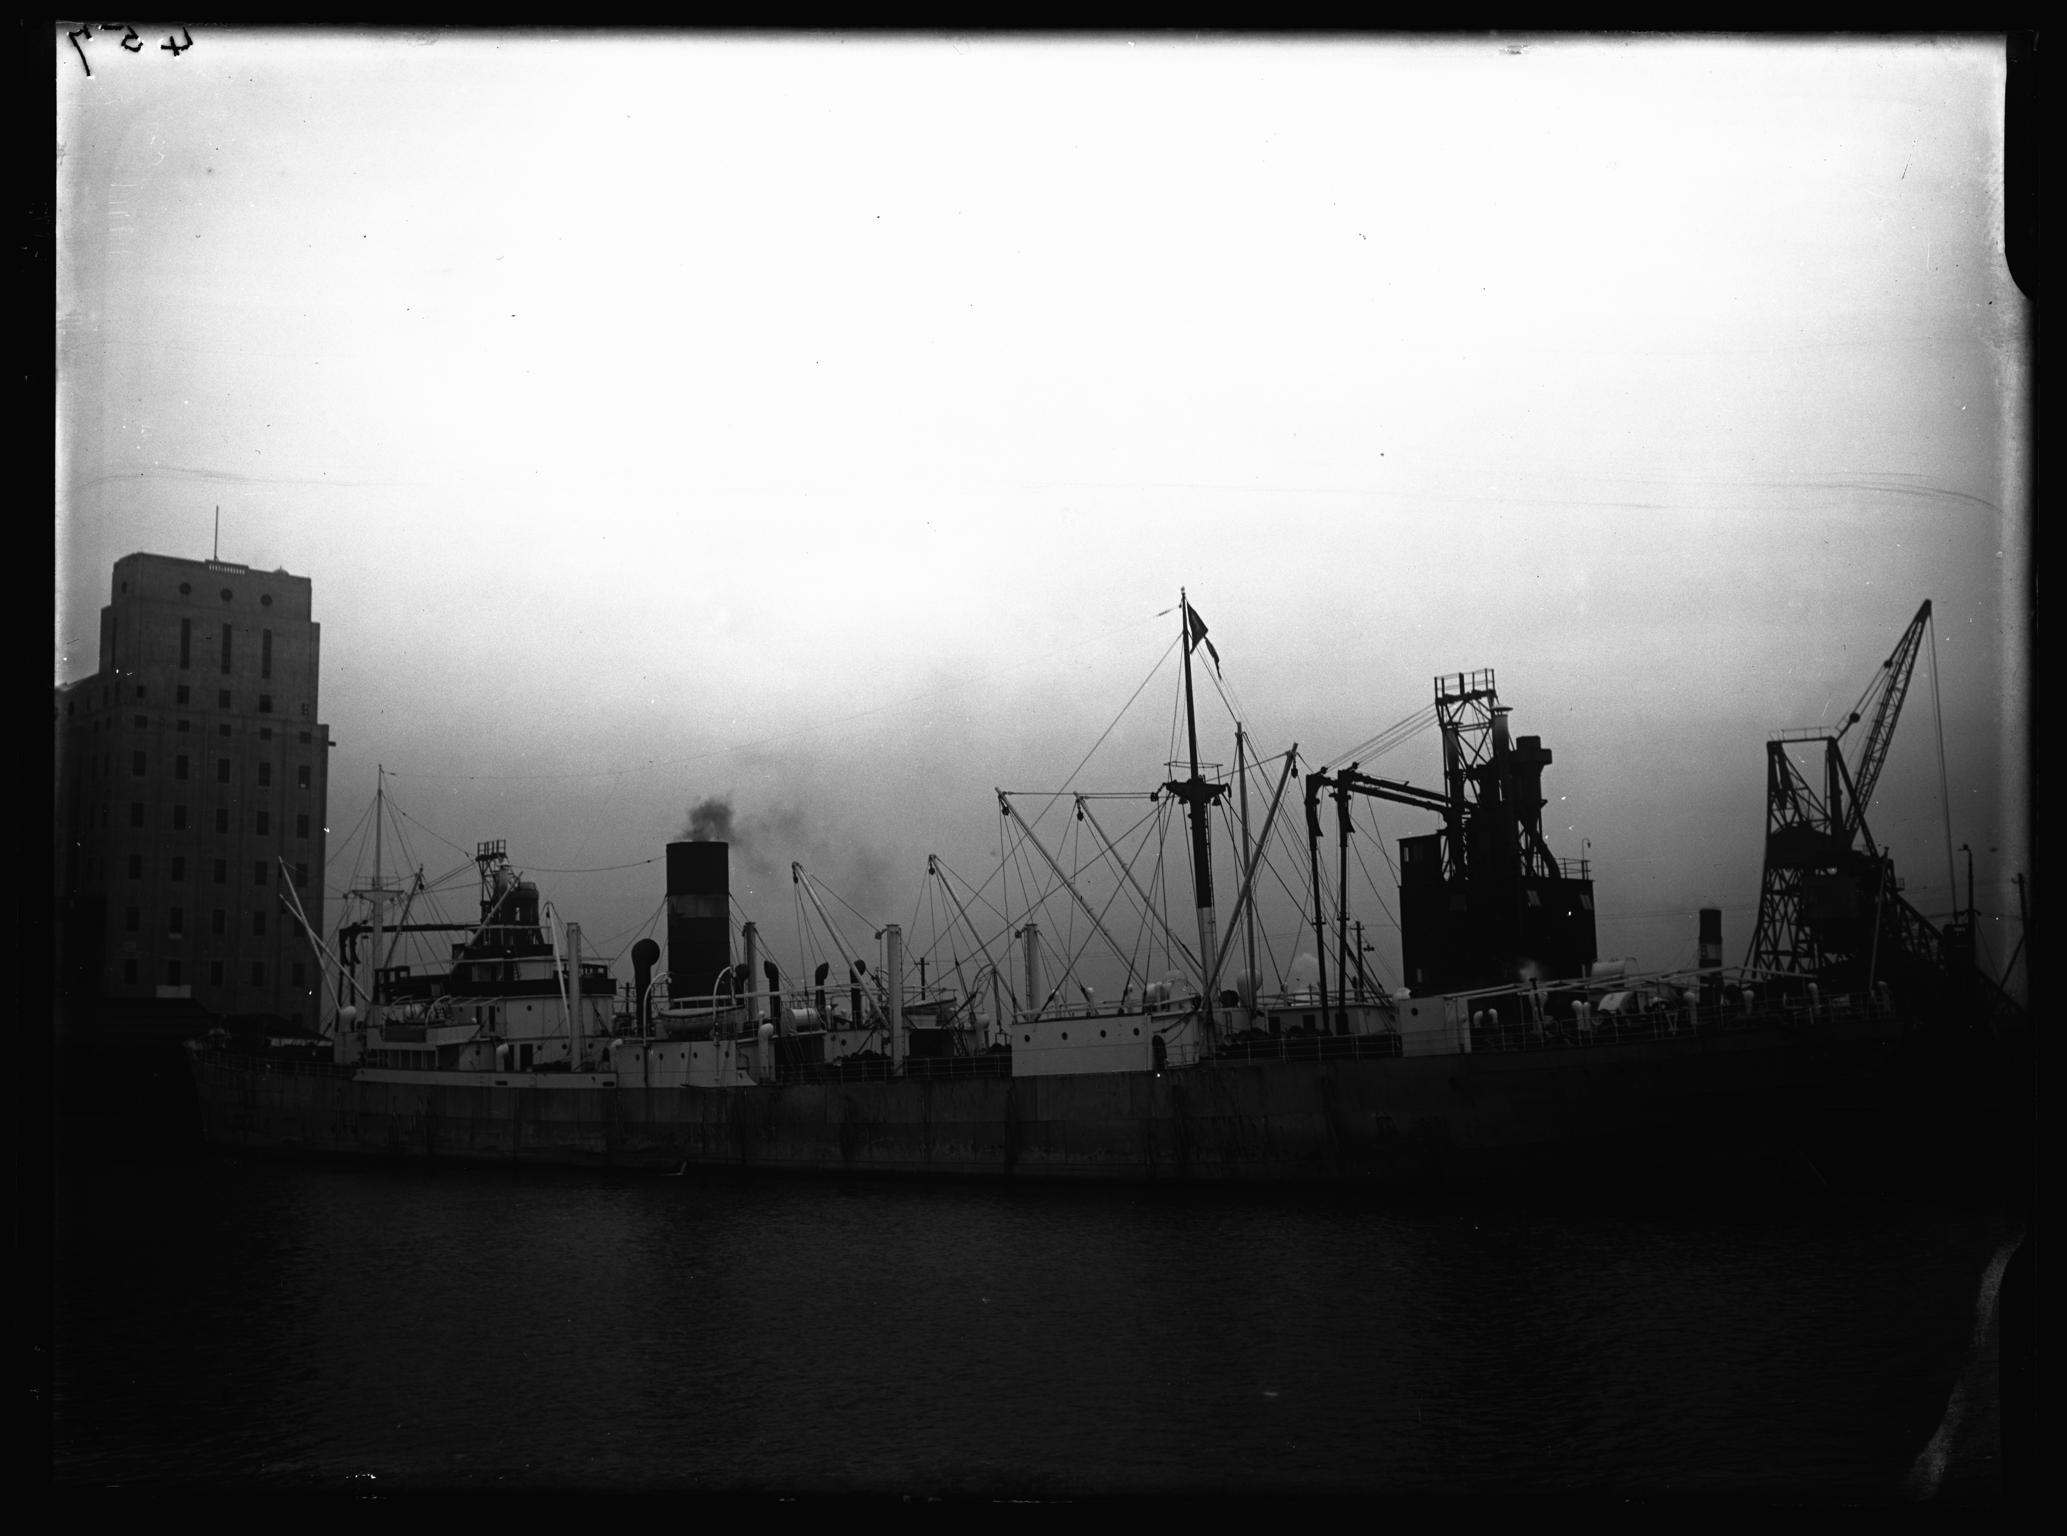 S.S. ANGLO-AFRICAN, glass negative